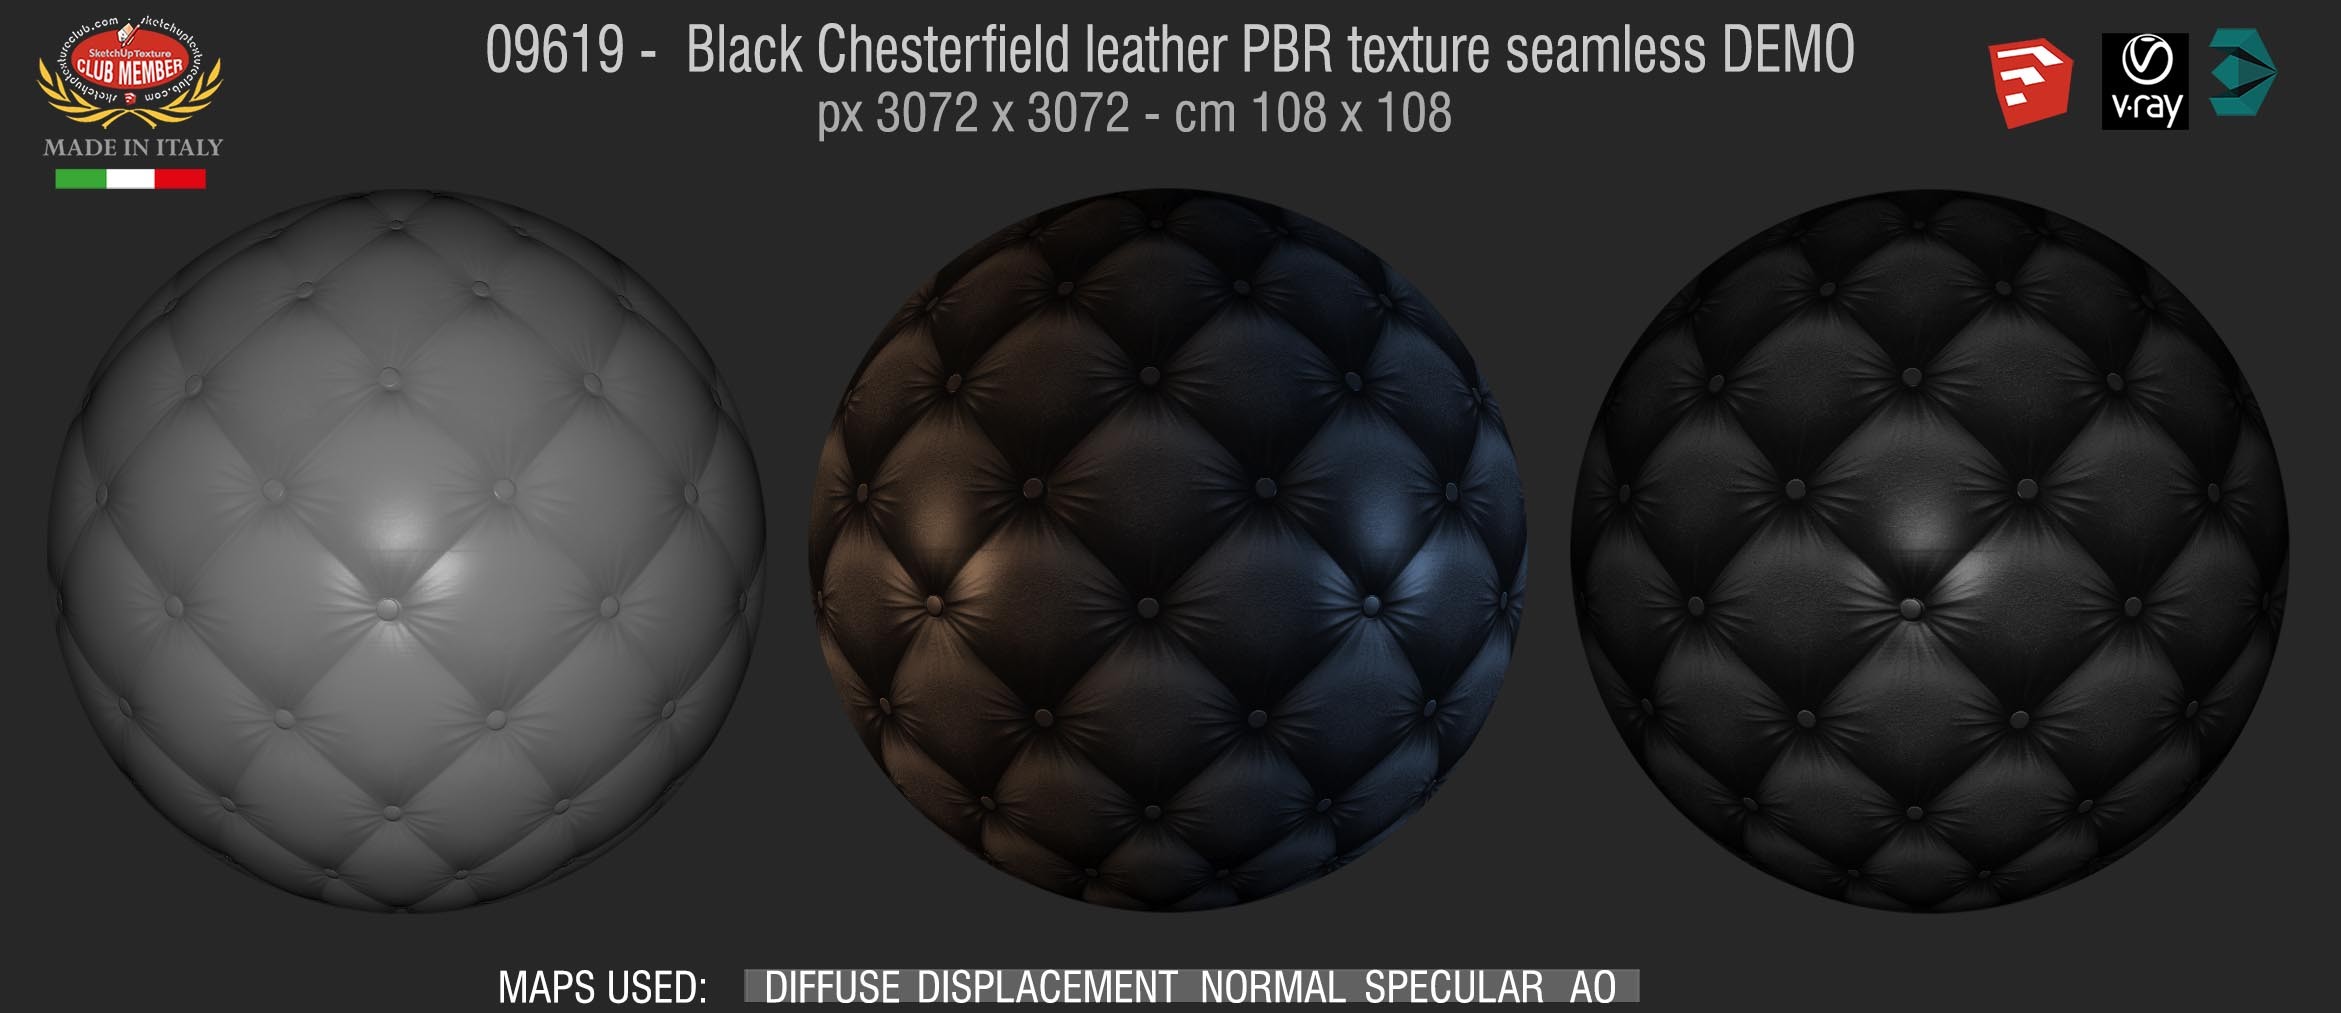 09619 Black Chesterfield leather PBR texture seamless DEMO